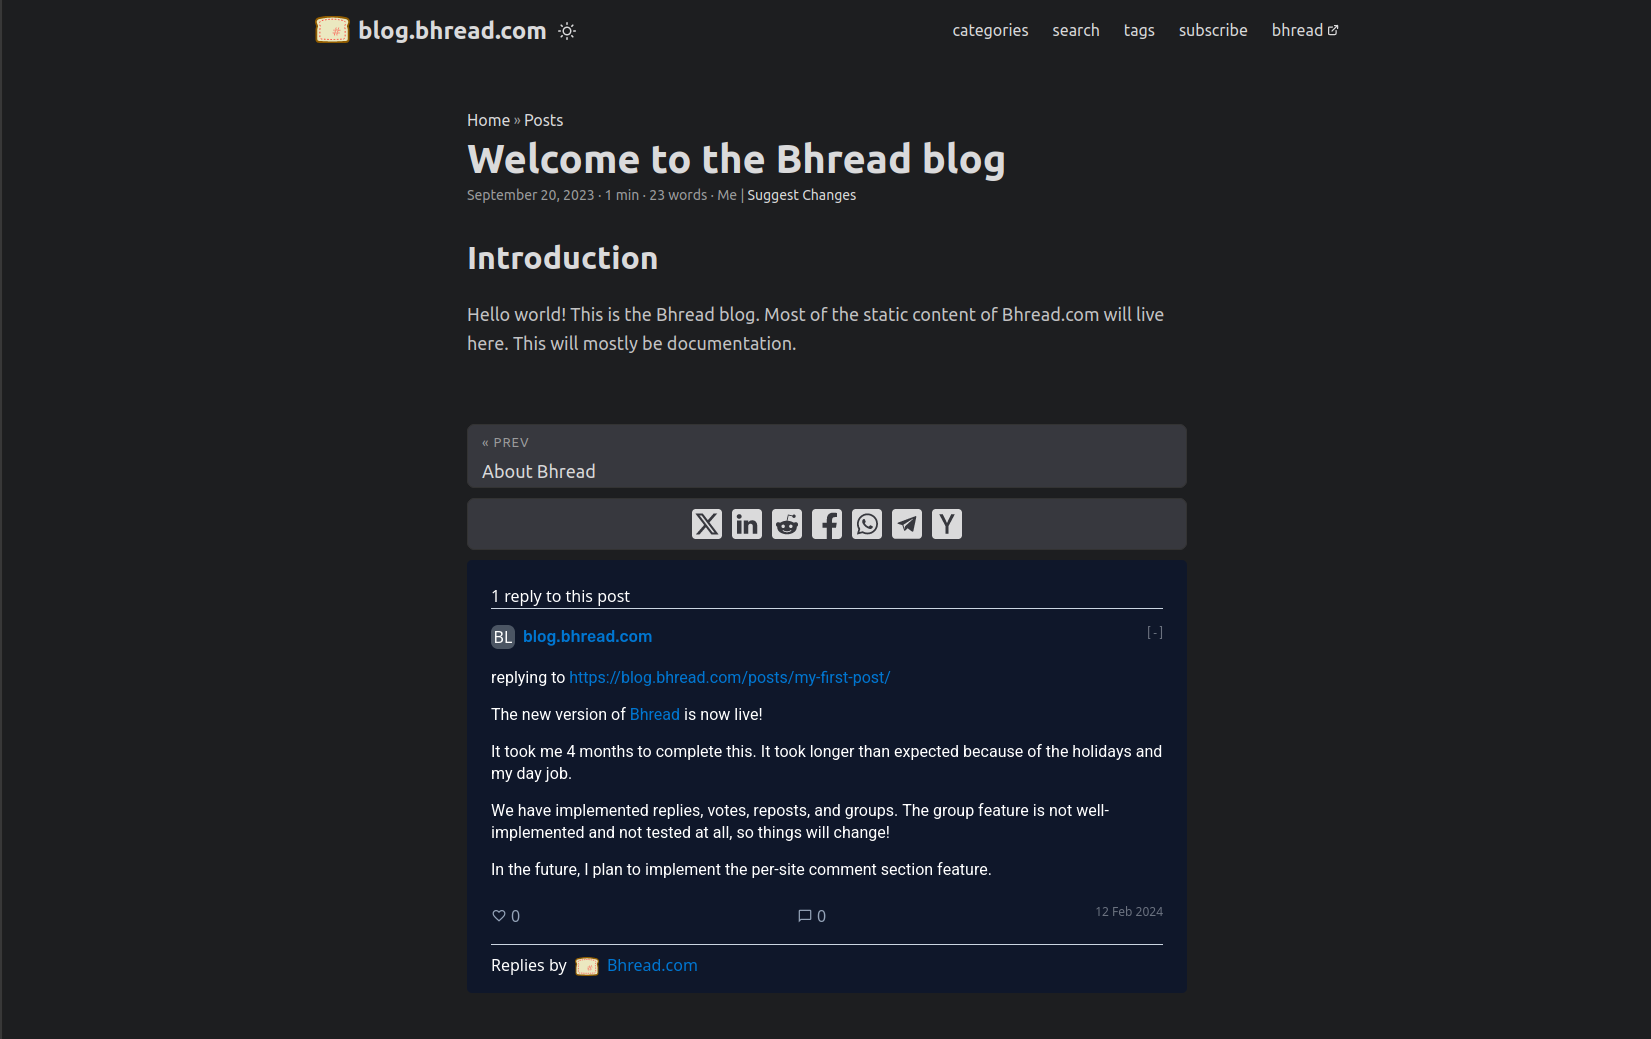 Screenshot of page with Bhread comments displayed and with replies